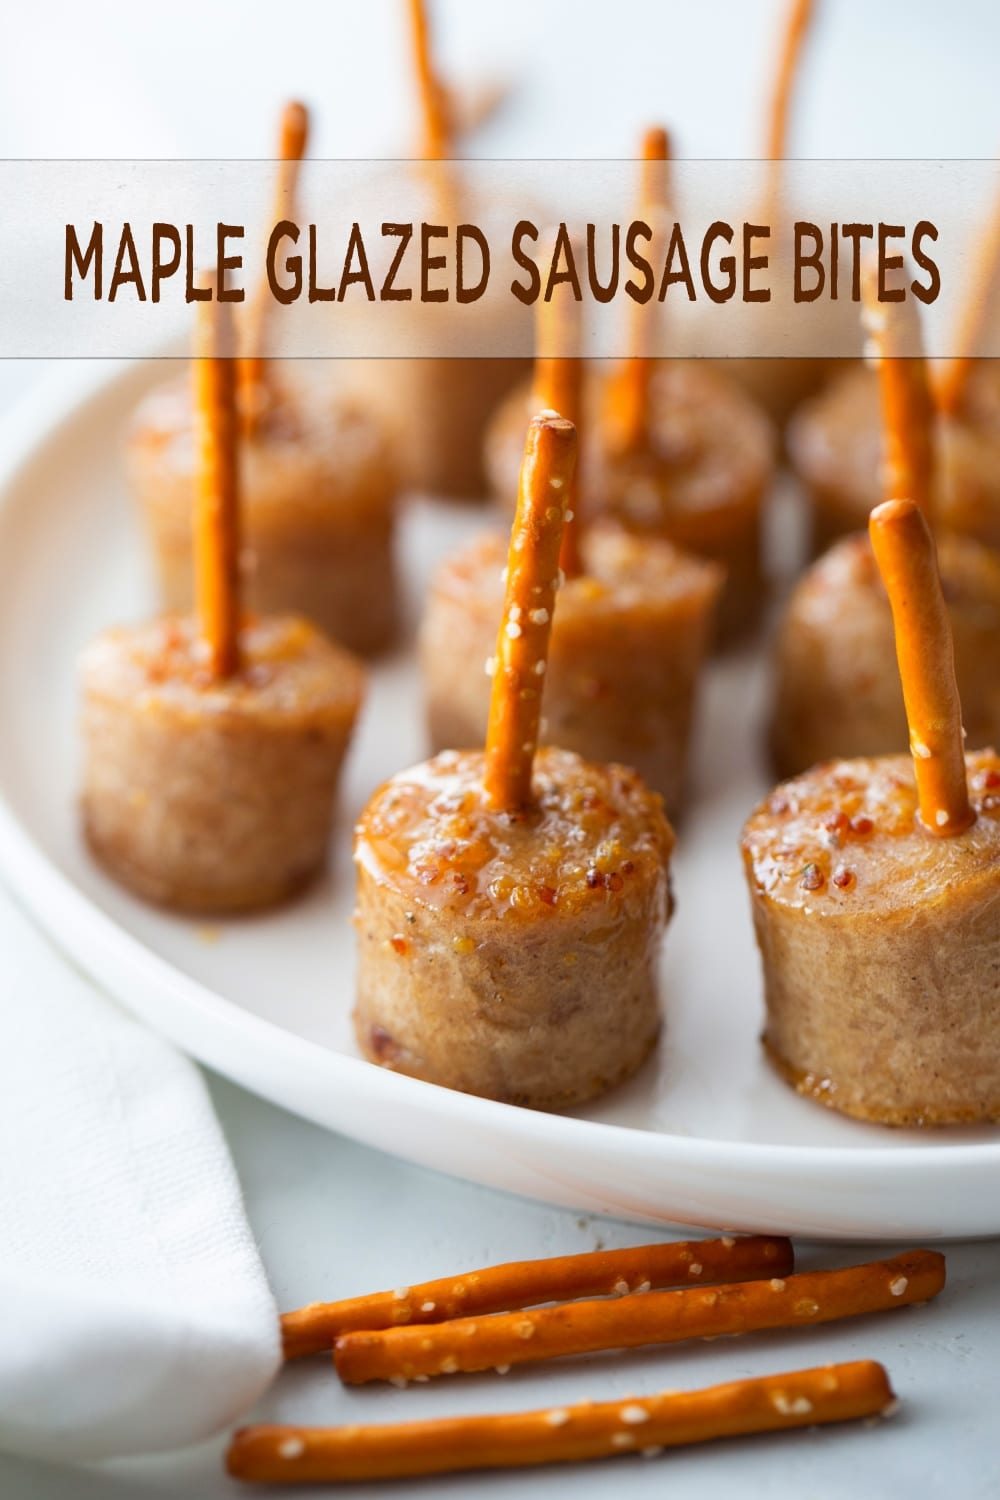 Enjoy the ultimate party appetizer with these delicious maple glazed sausage bites - bursting with flavor and perfectly glazed with a rich, sweet and sauce. Perfect for any gathering, these tasty bites are sure to be a hit with your guests. Try them today and elevate your party to the next level! via @cmpollak1